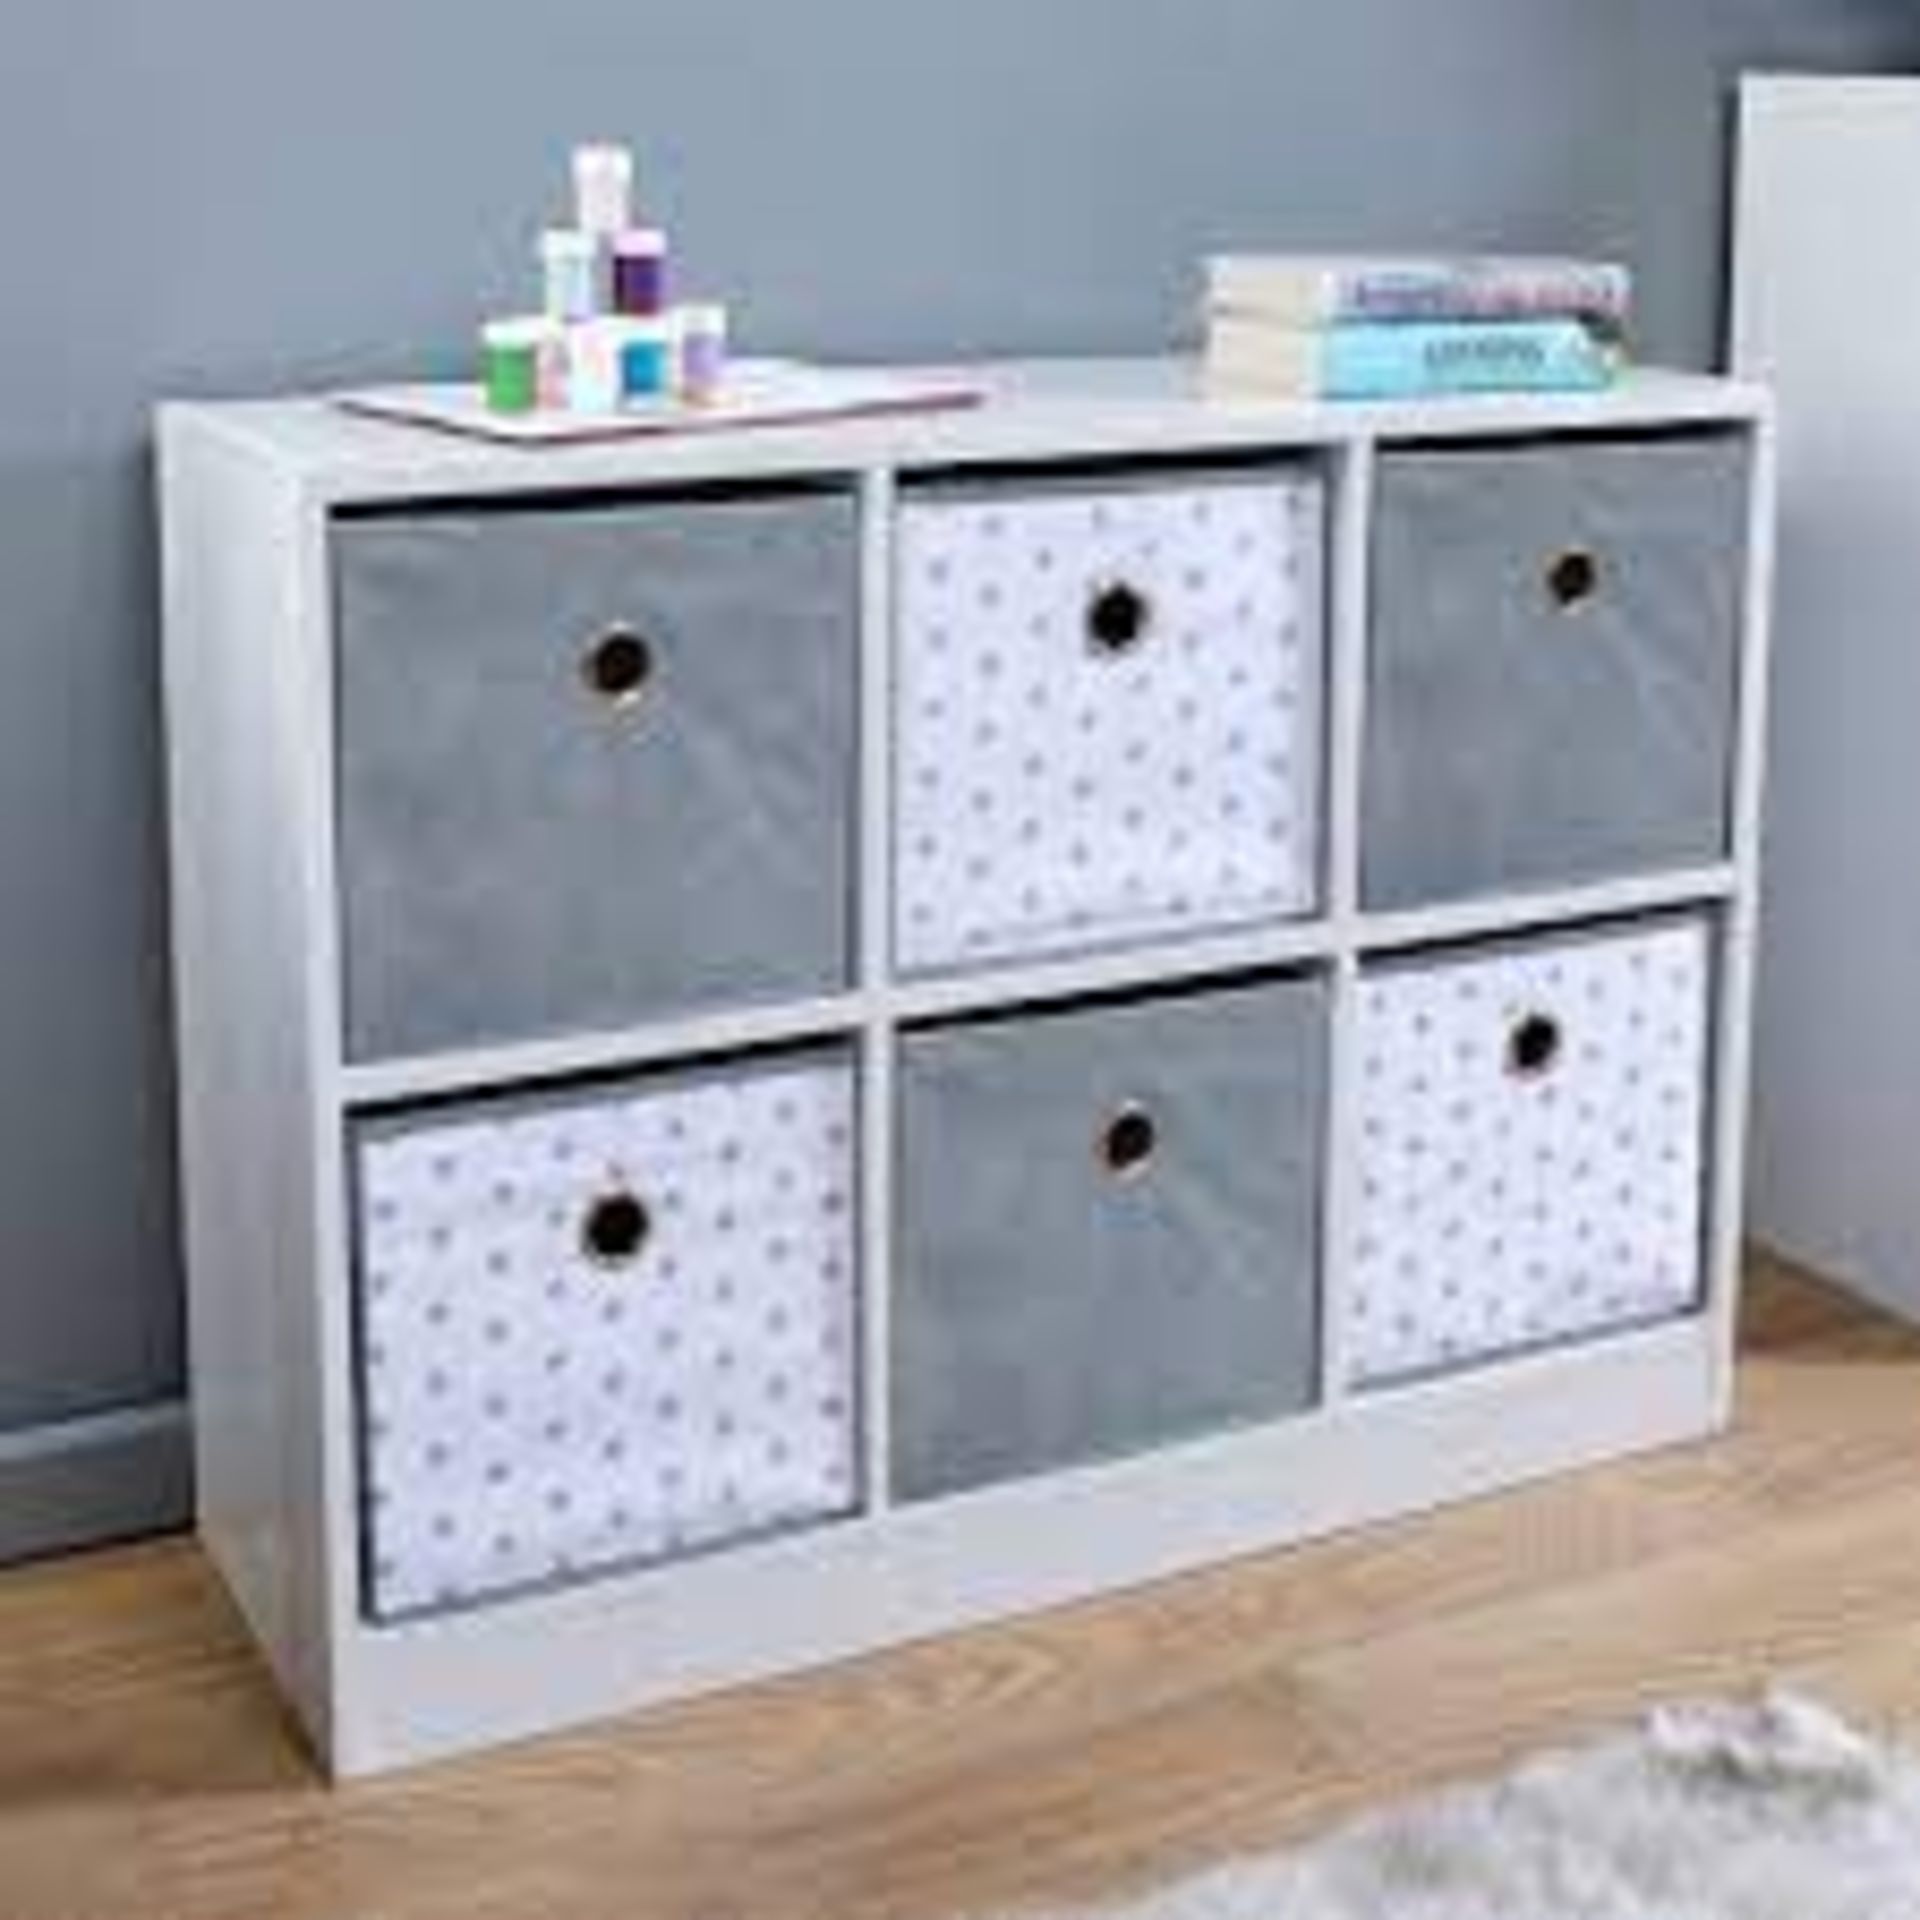 Jive 6 Cube Storage Drawers - Grey/Grey Stars. - SR3. This grey and white storage bookcase is the